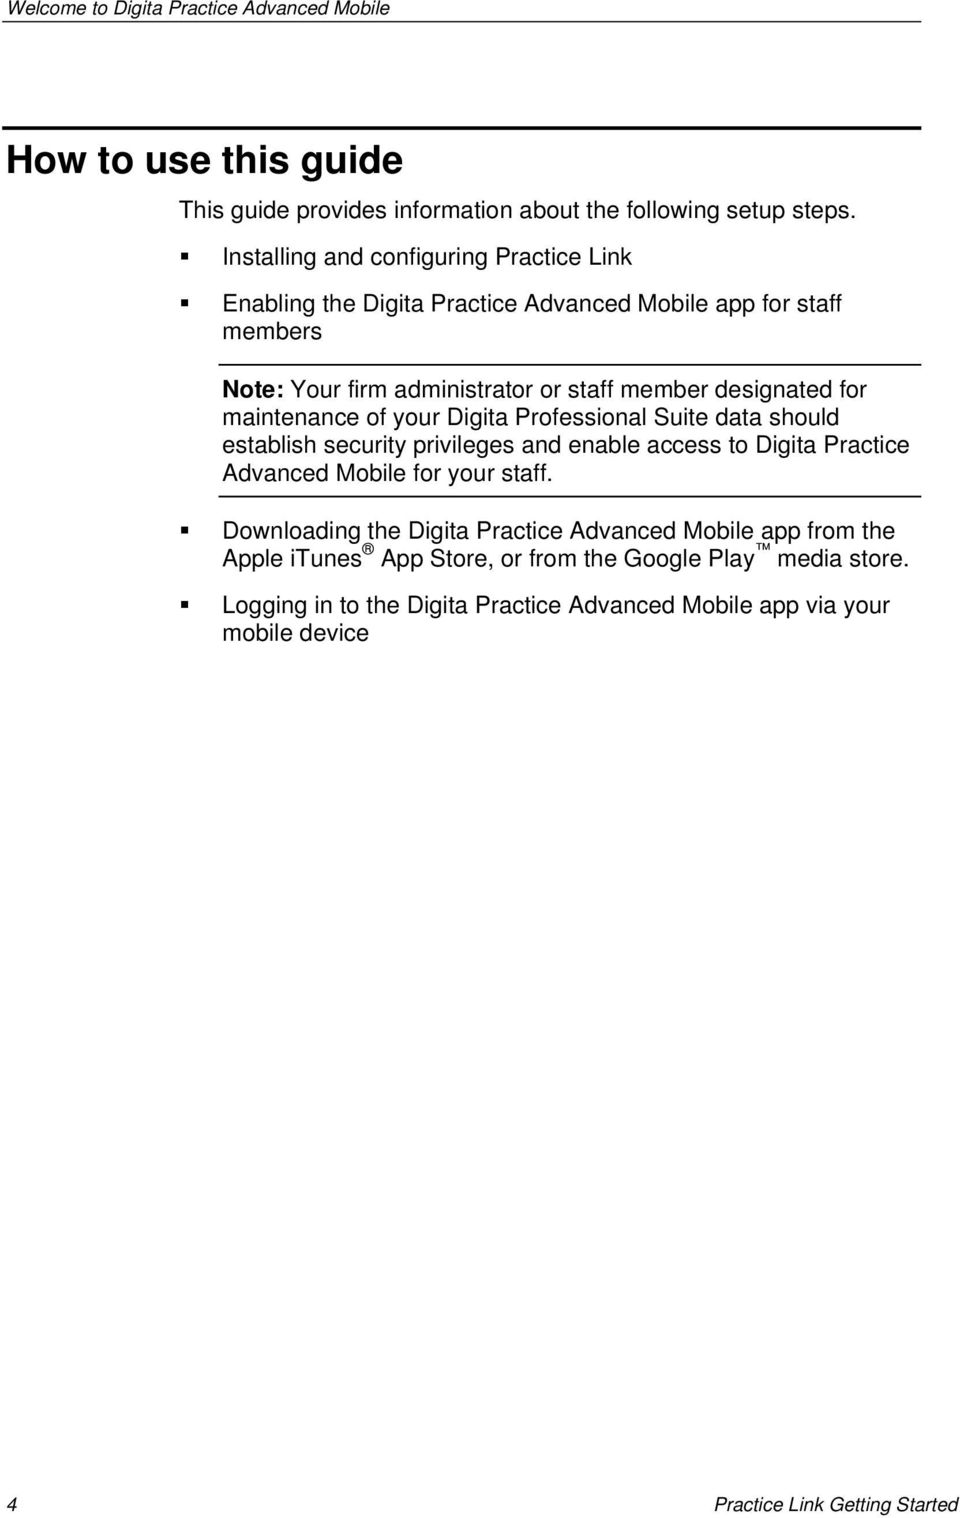 maintenance of your Digita Professional Suite data should establish security privileges and enable access to Digita Practice Advanced Mobile for your staff.